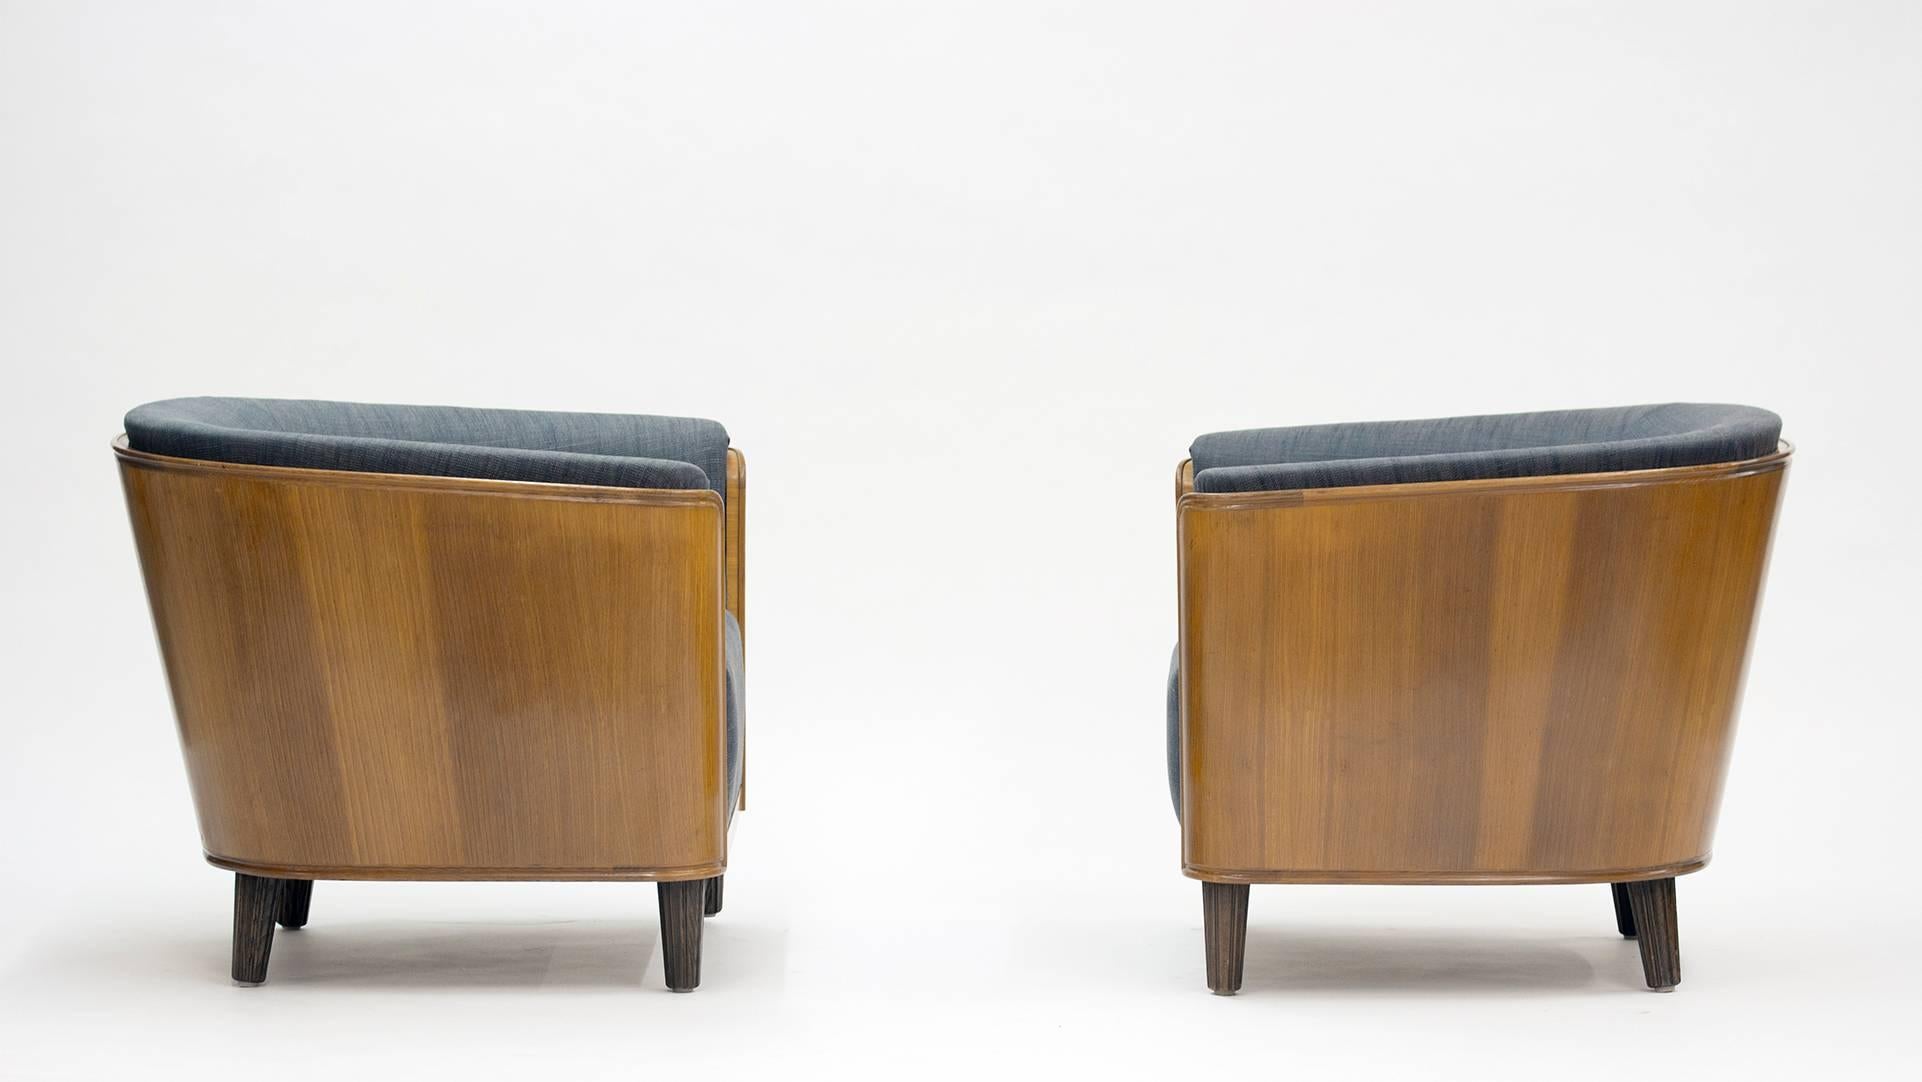 Pair of impressive 1930s lounge chairs by Oscar Nilsson with luxurious elm tree shells and modern blueish grey upholstery forming a perfect match.

Oscar Nilsson was an architect contemporary of Carl Malmsten and Axel Einar Hjort, designing